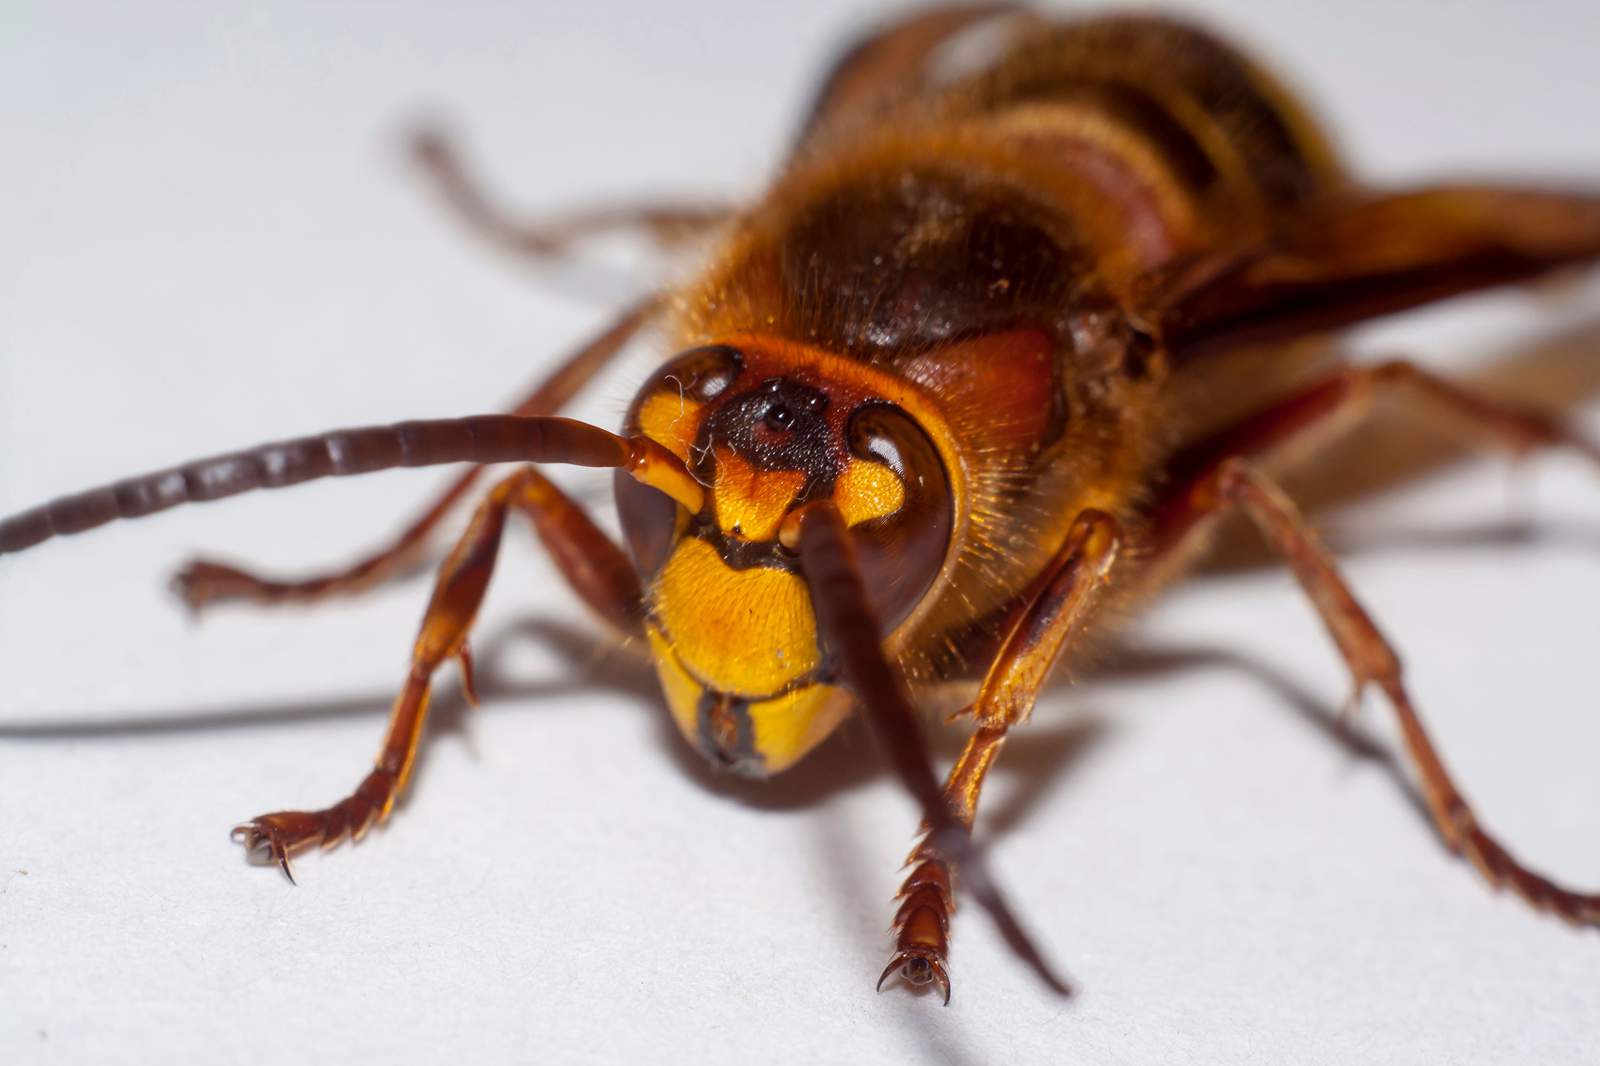 Invasive ’Murder Hornet’ spotted in US for first time